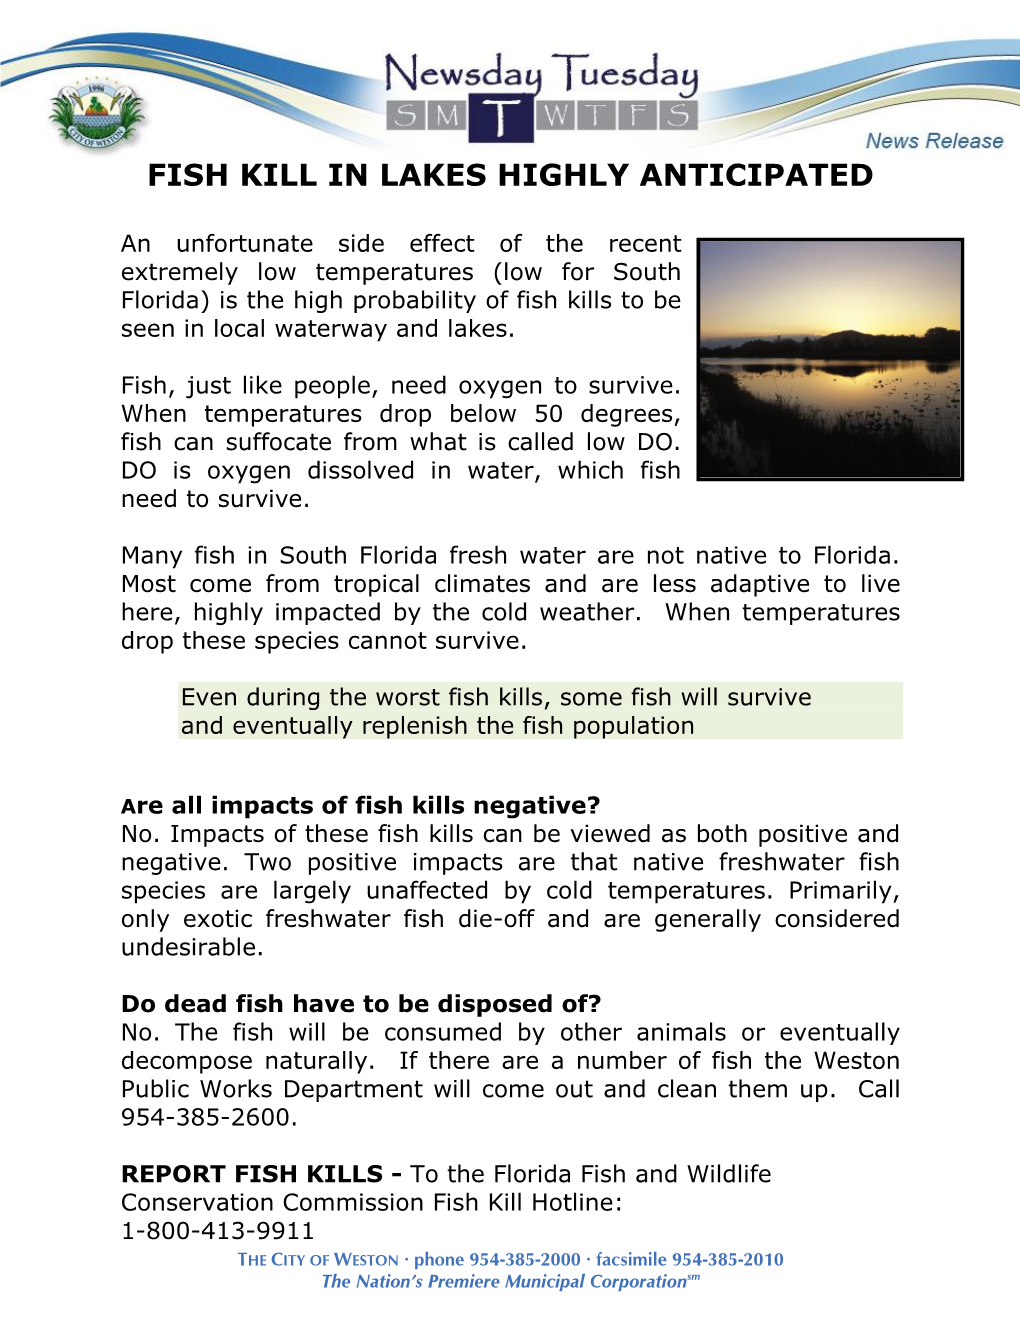 Fish Kill in Lakes Highly Anticipated